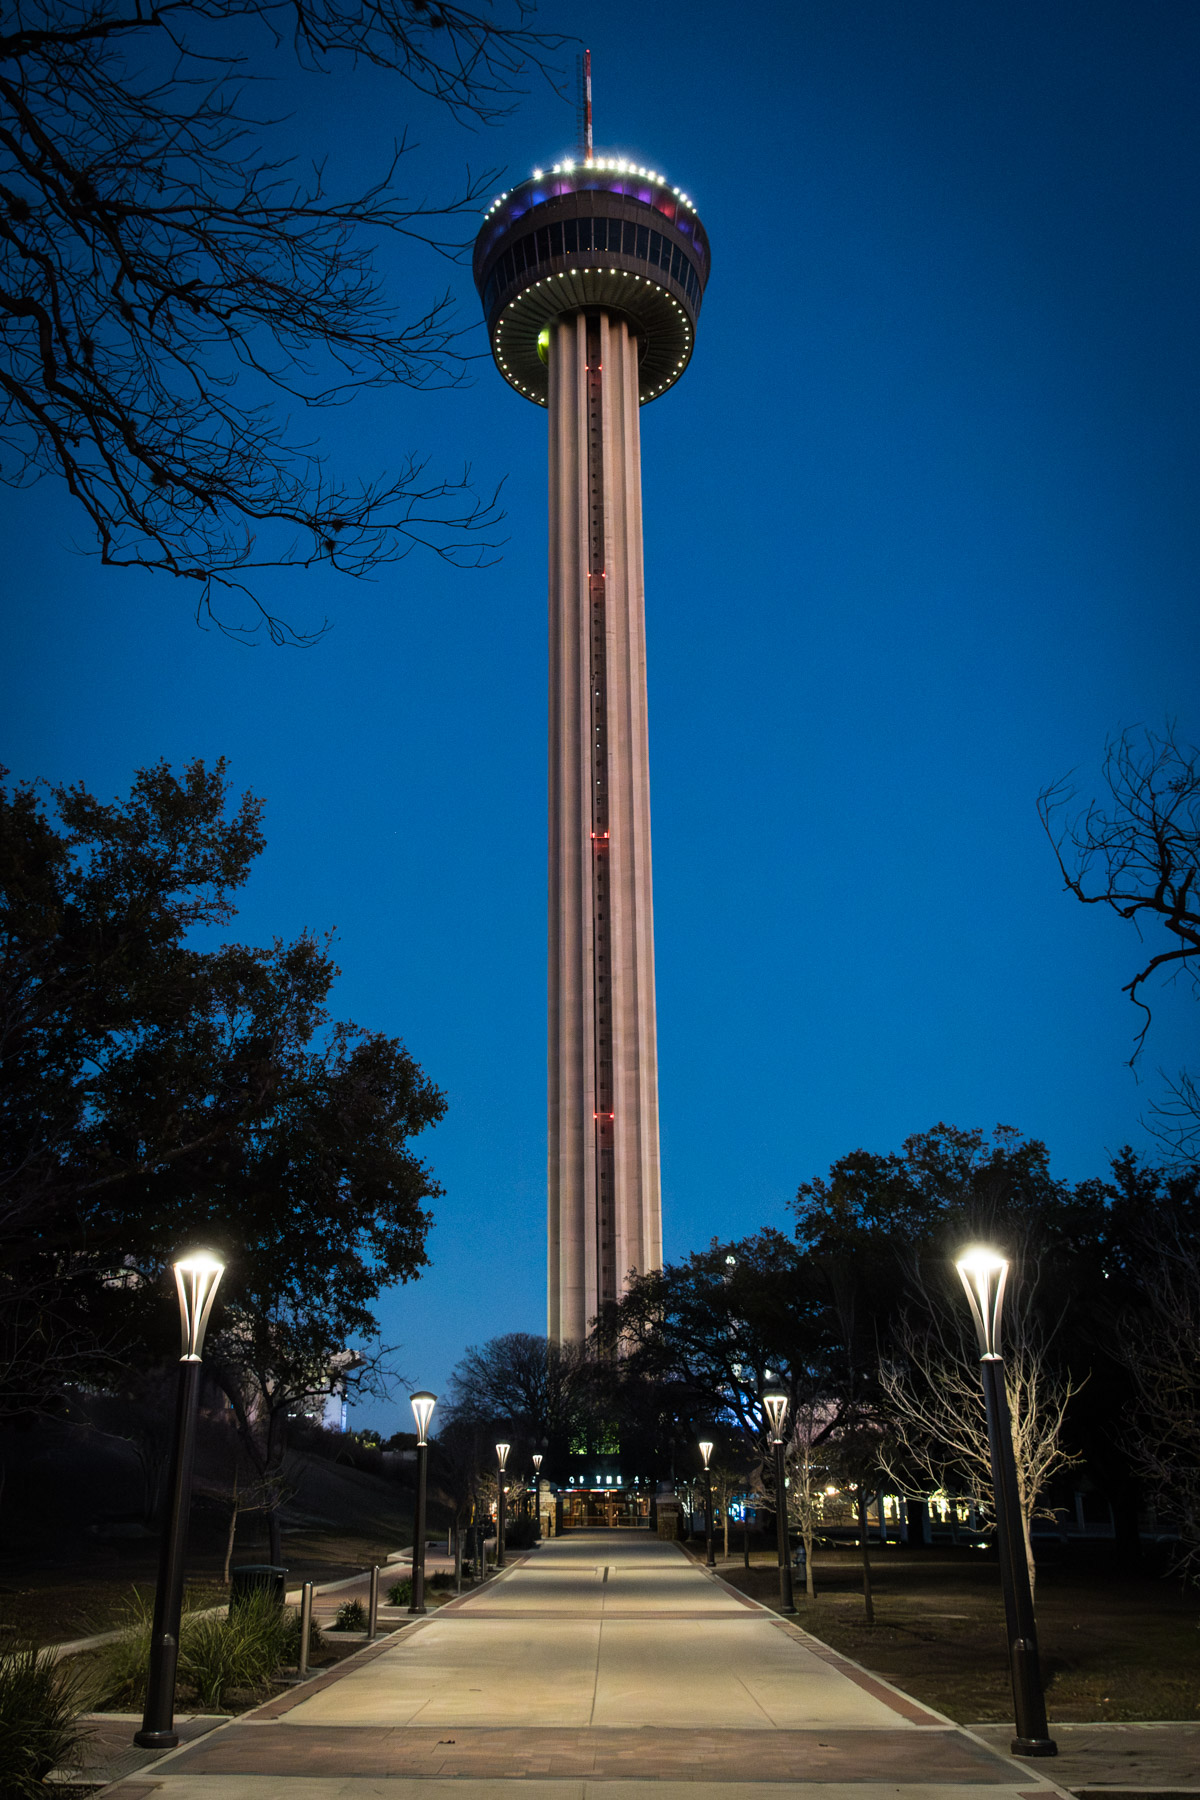 Pathway leading to the Tower of the Americas in Hemisfair Park for an article on how to propose at the Tower of the Americas